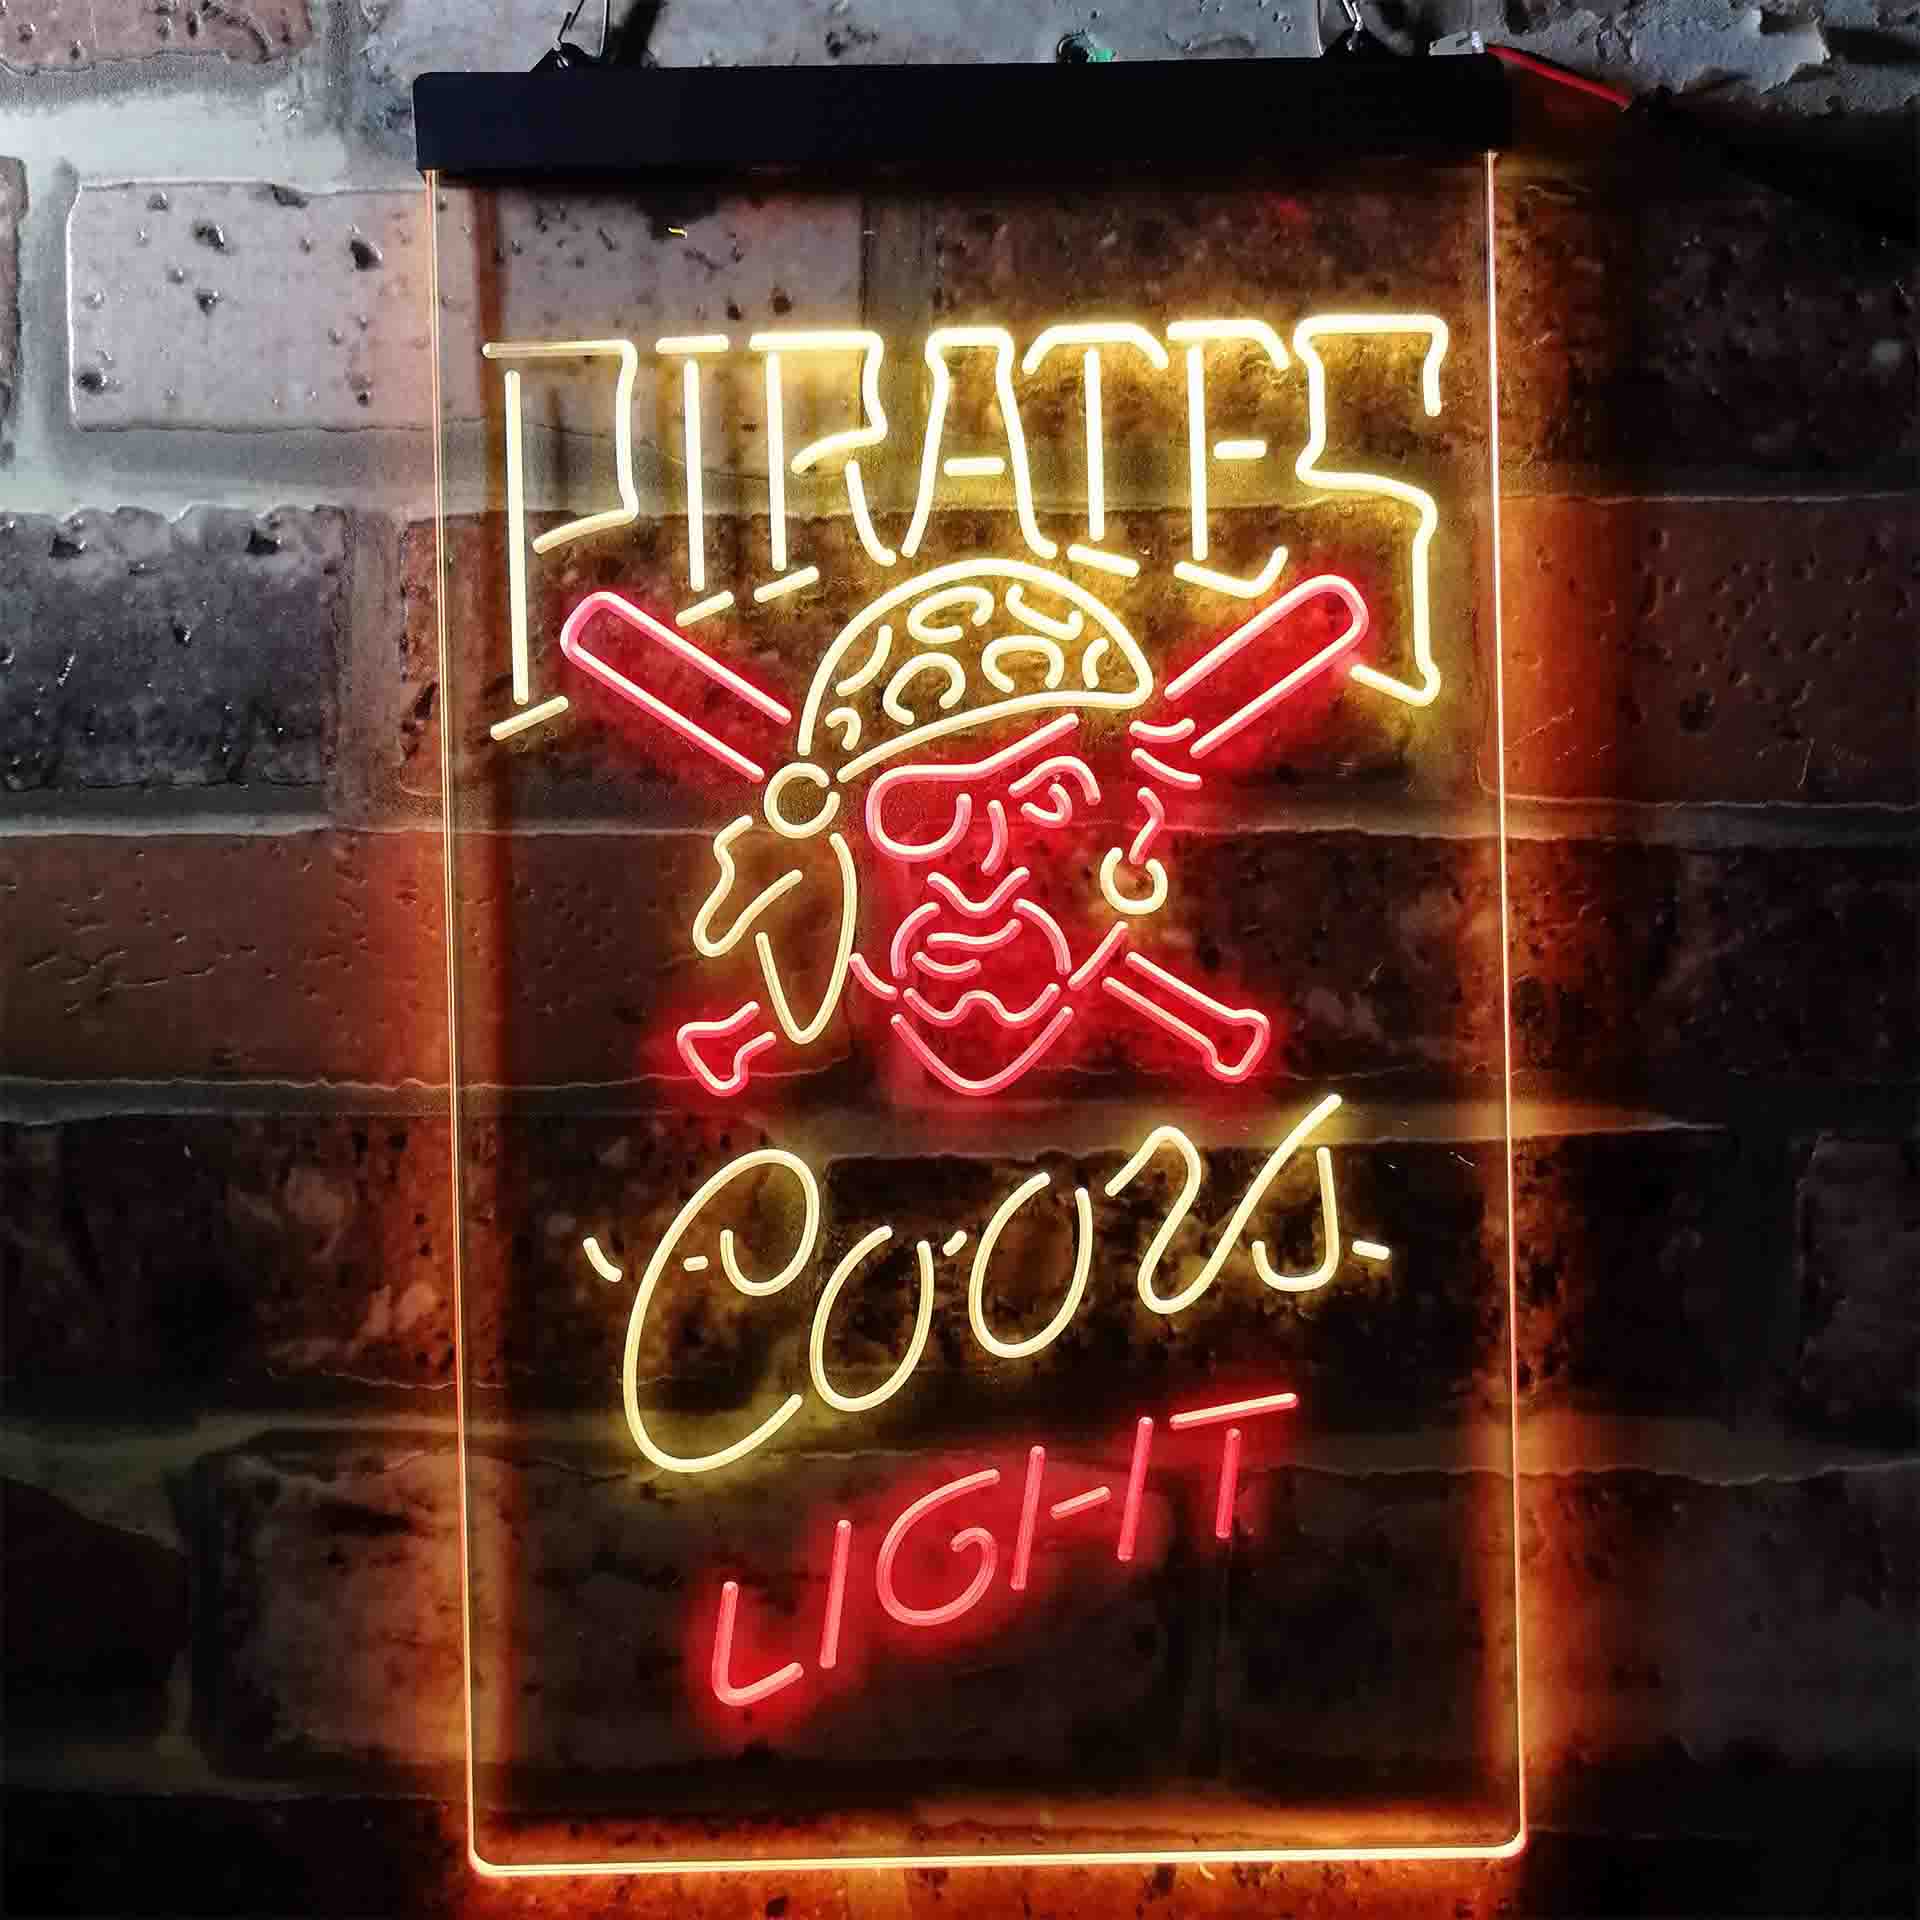 Pittsburgh Pirates Coors Light LED Neon Sign